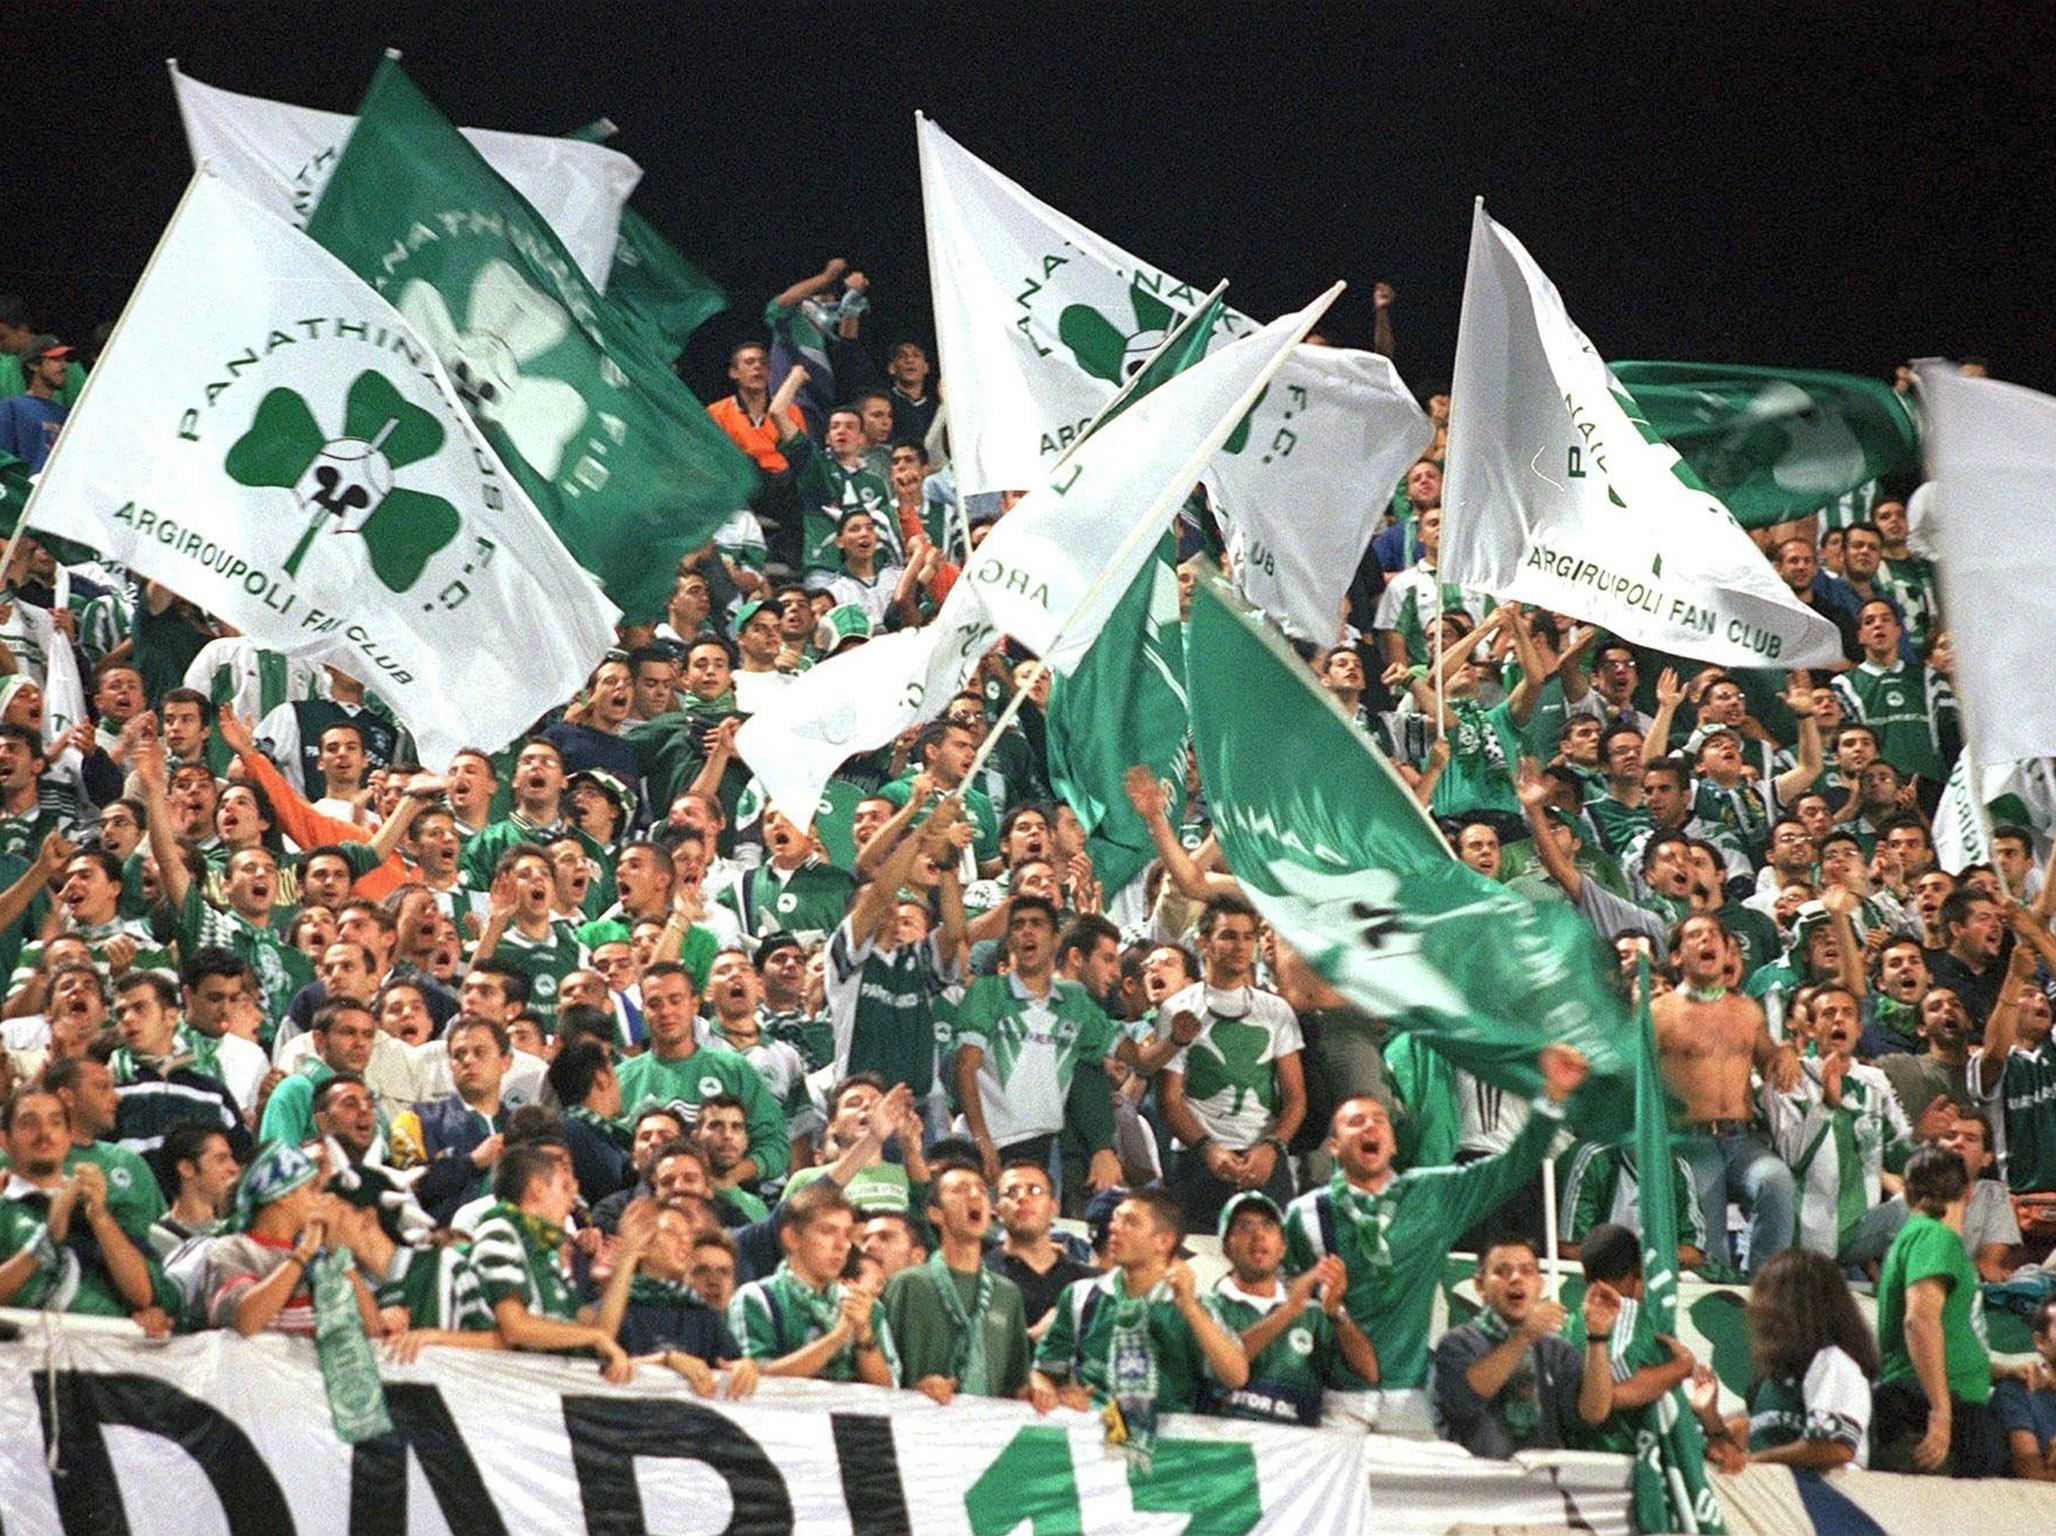 Panathinaikos supporters will not be watching European football